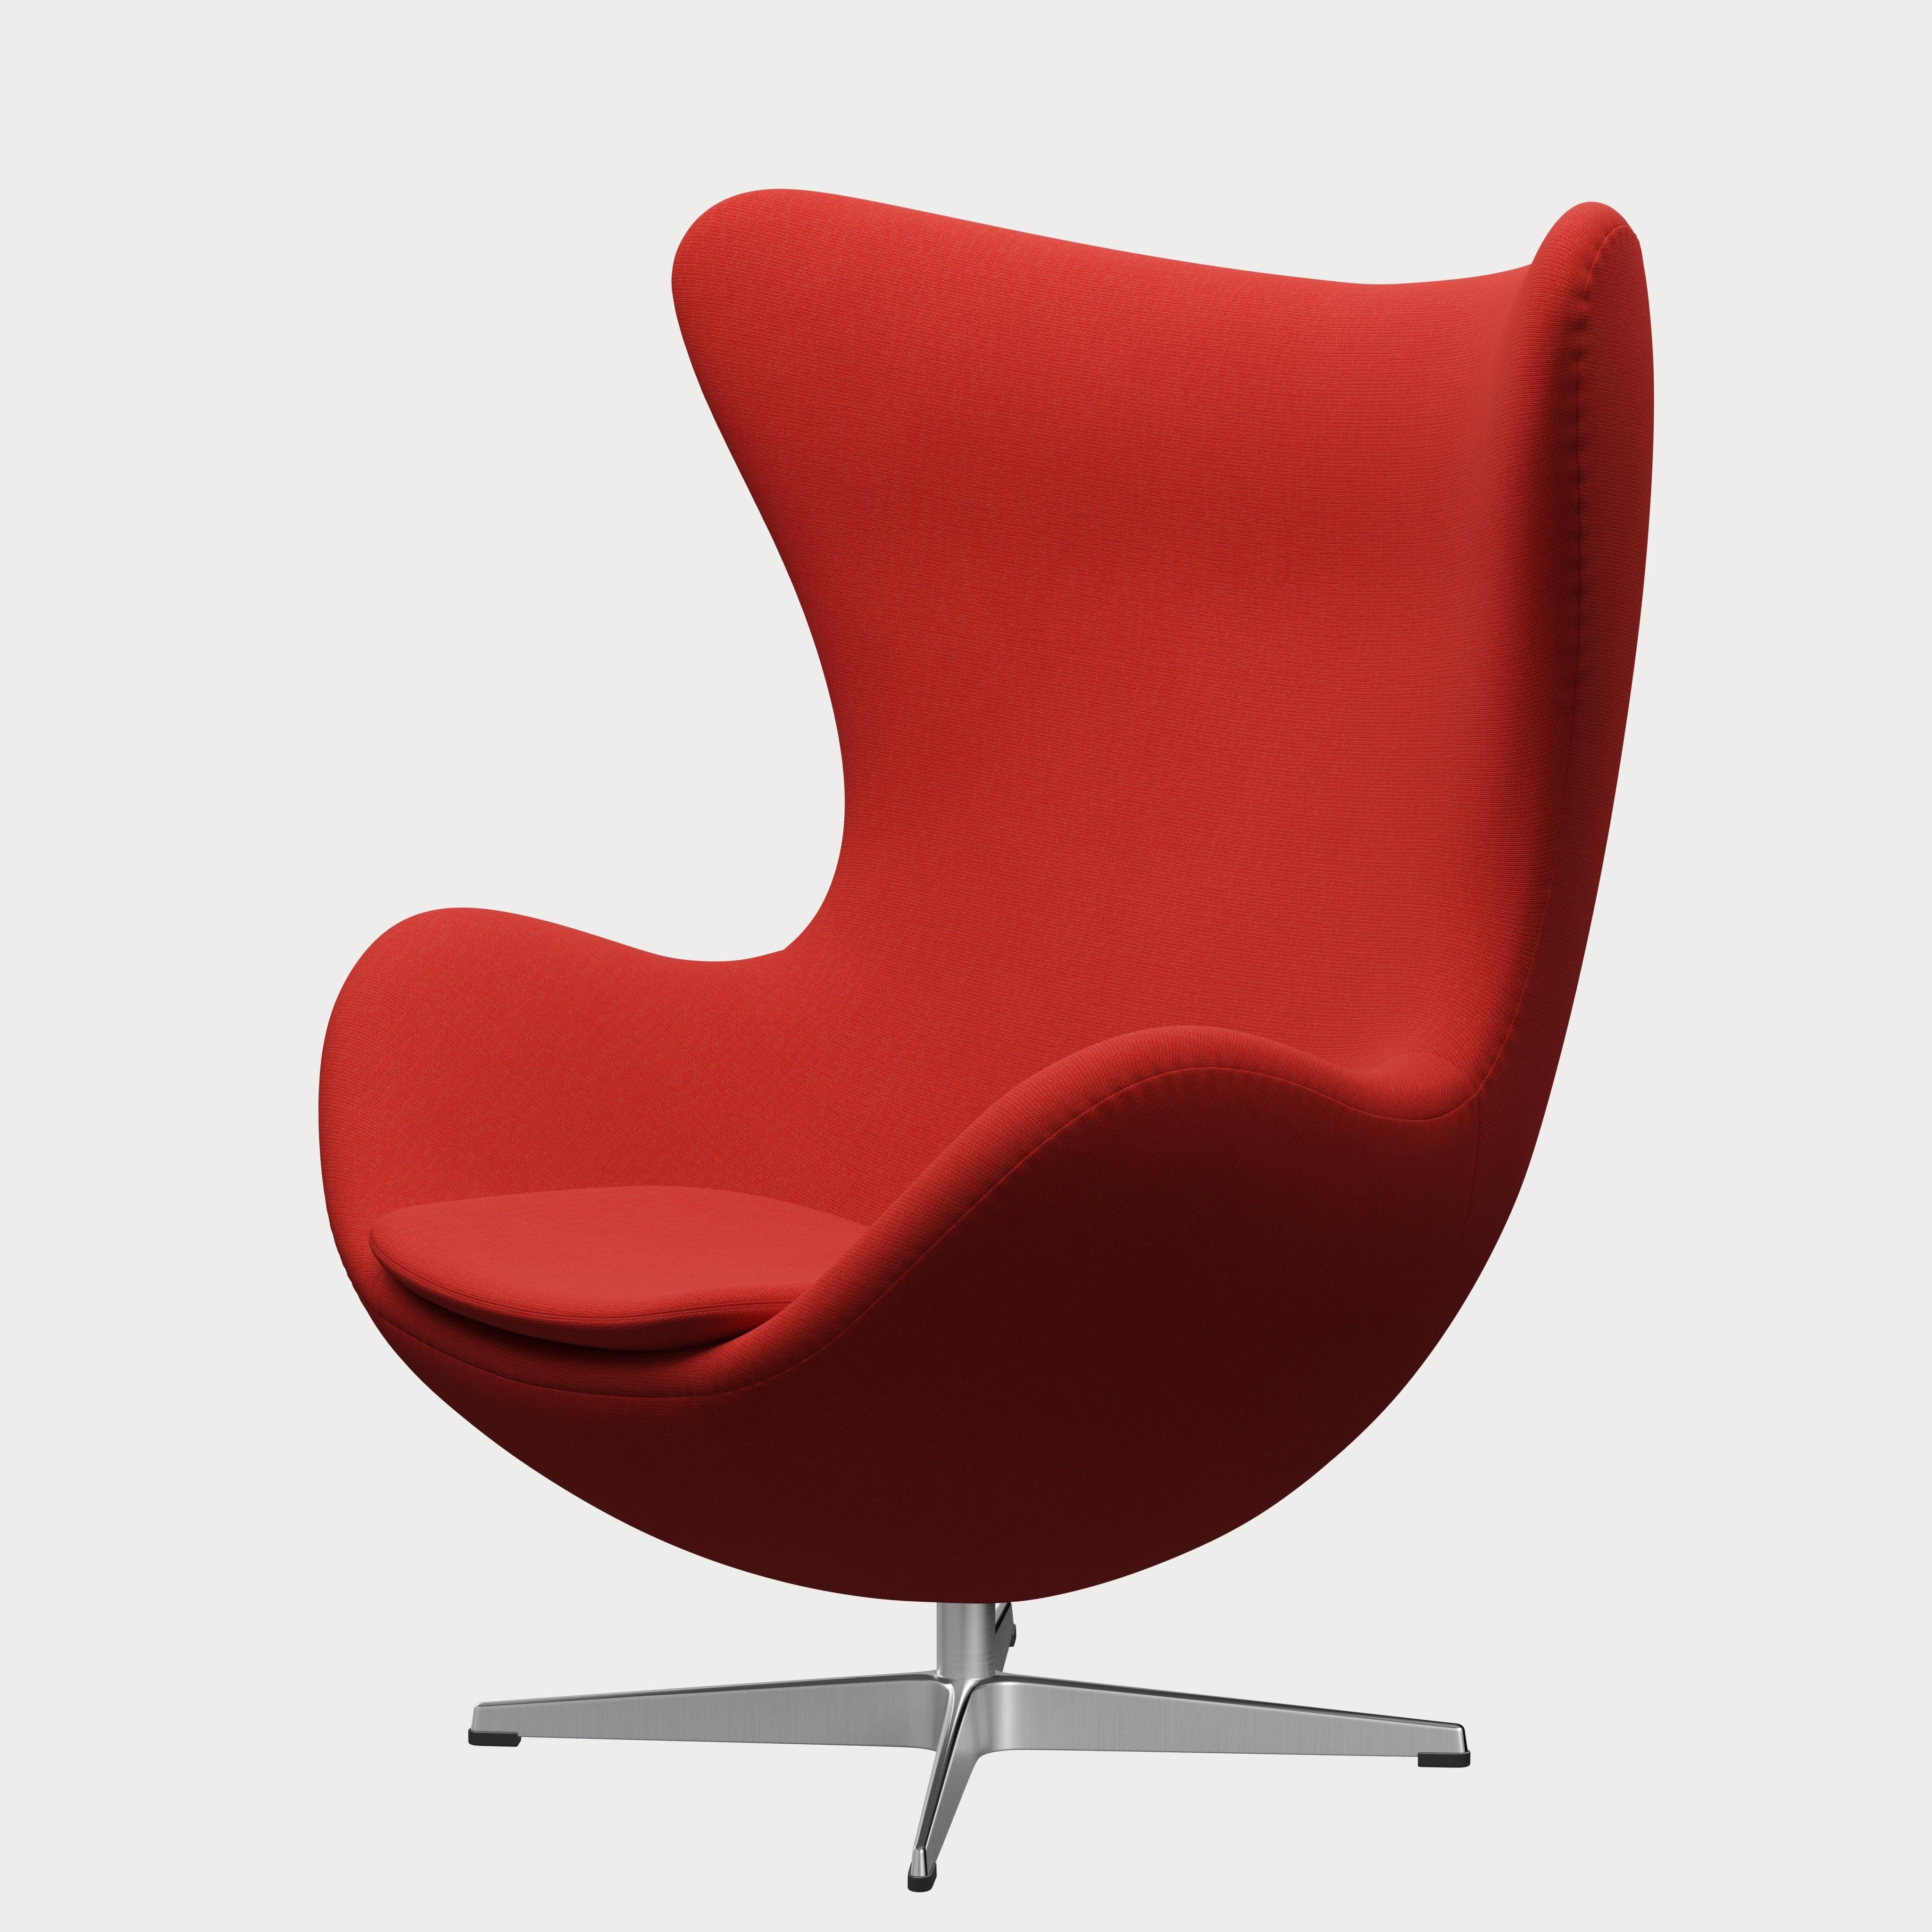 Arne Jacobsen 'Egg' Chair for Fritz Hansen in Fabric Upholstery (Cat. 1) In New Condition For Sale In Glendale, CA